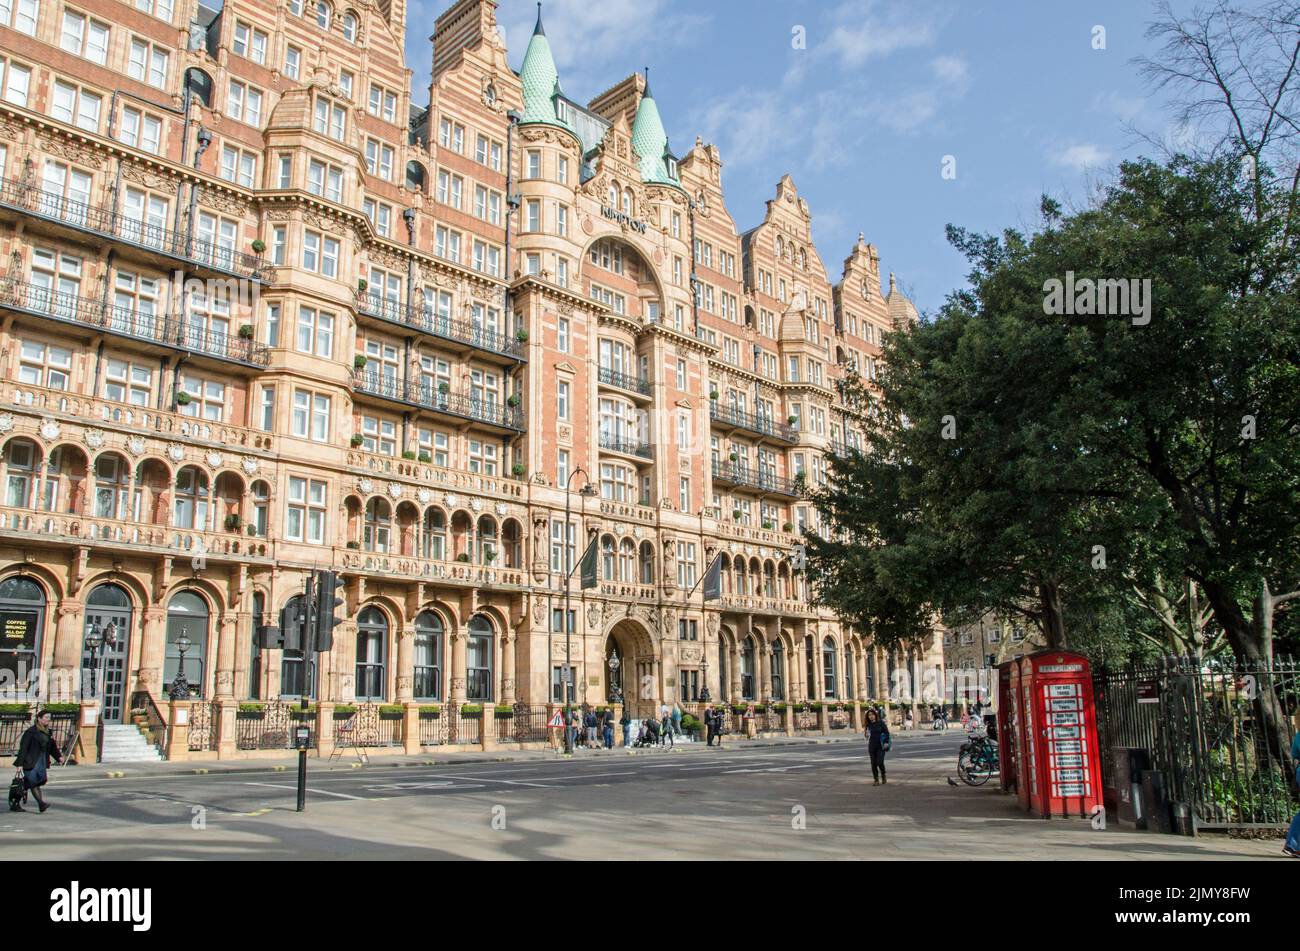 London, UK - March 21, 2022: View across a corner of Russell Square looking at the facade of the Kimpton Fitzroy Hotel, formerly the Hotel Russell, in Stock Photo